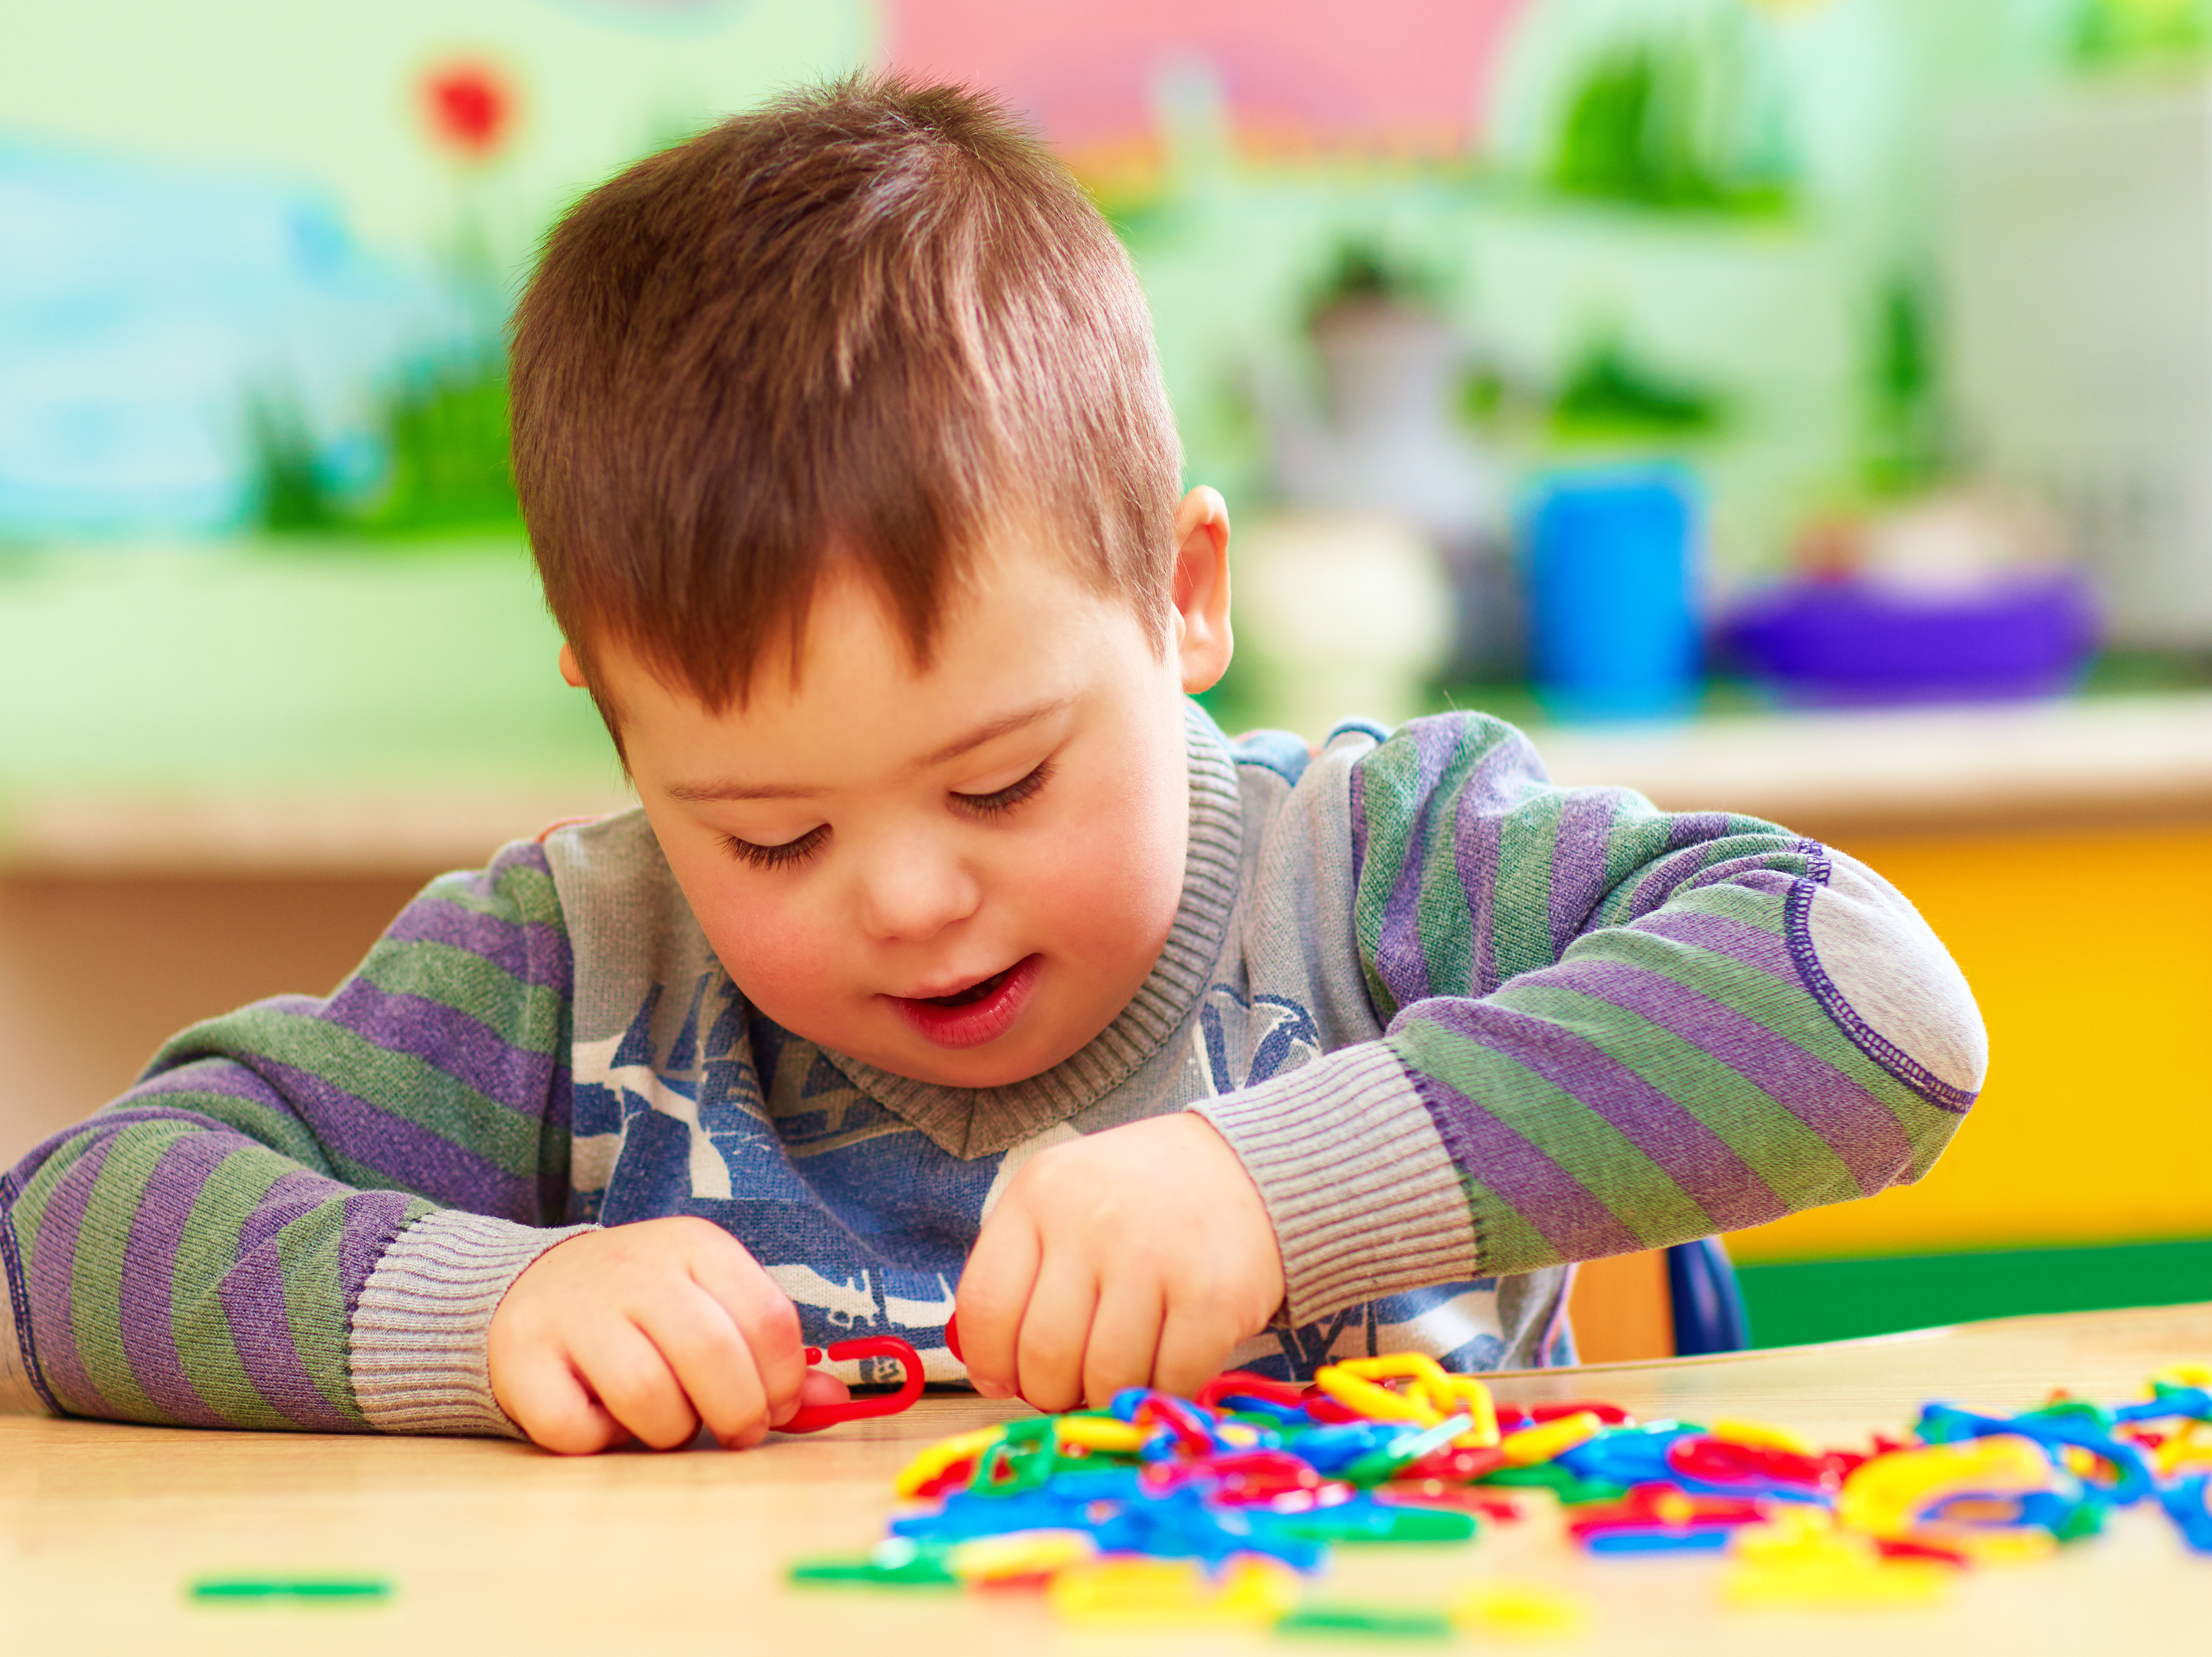 How Sensory Toys Could Benefit Children with Processing Disorders